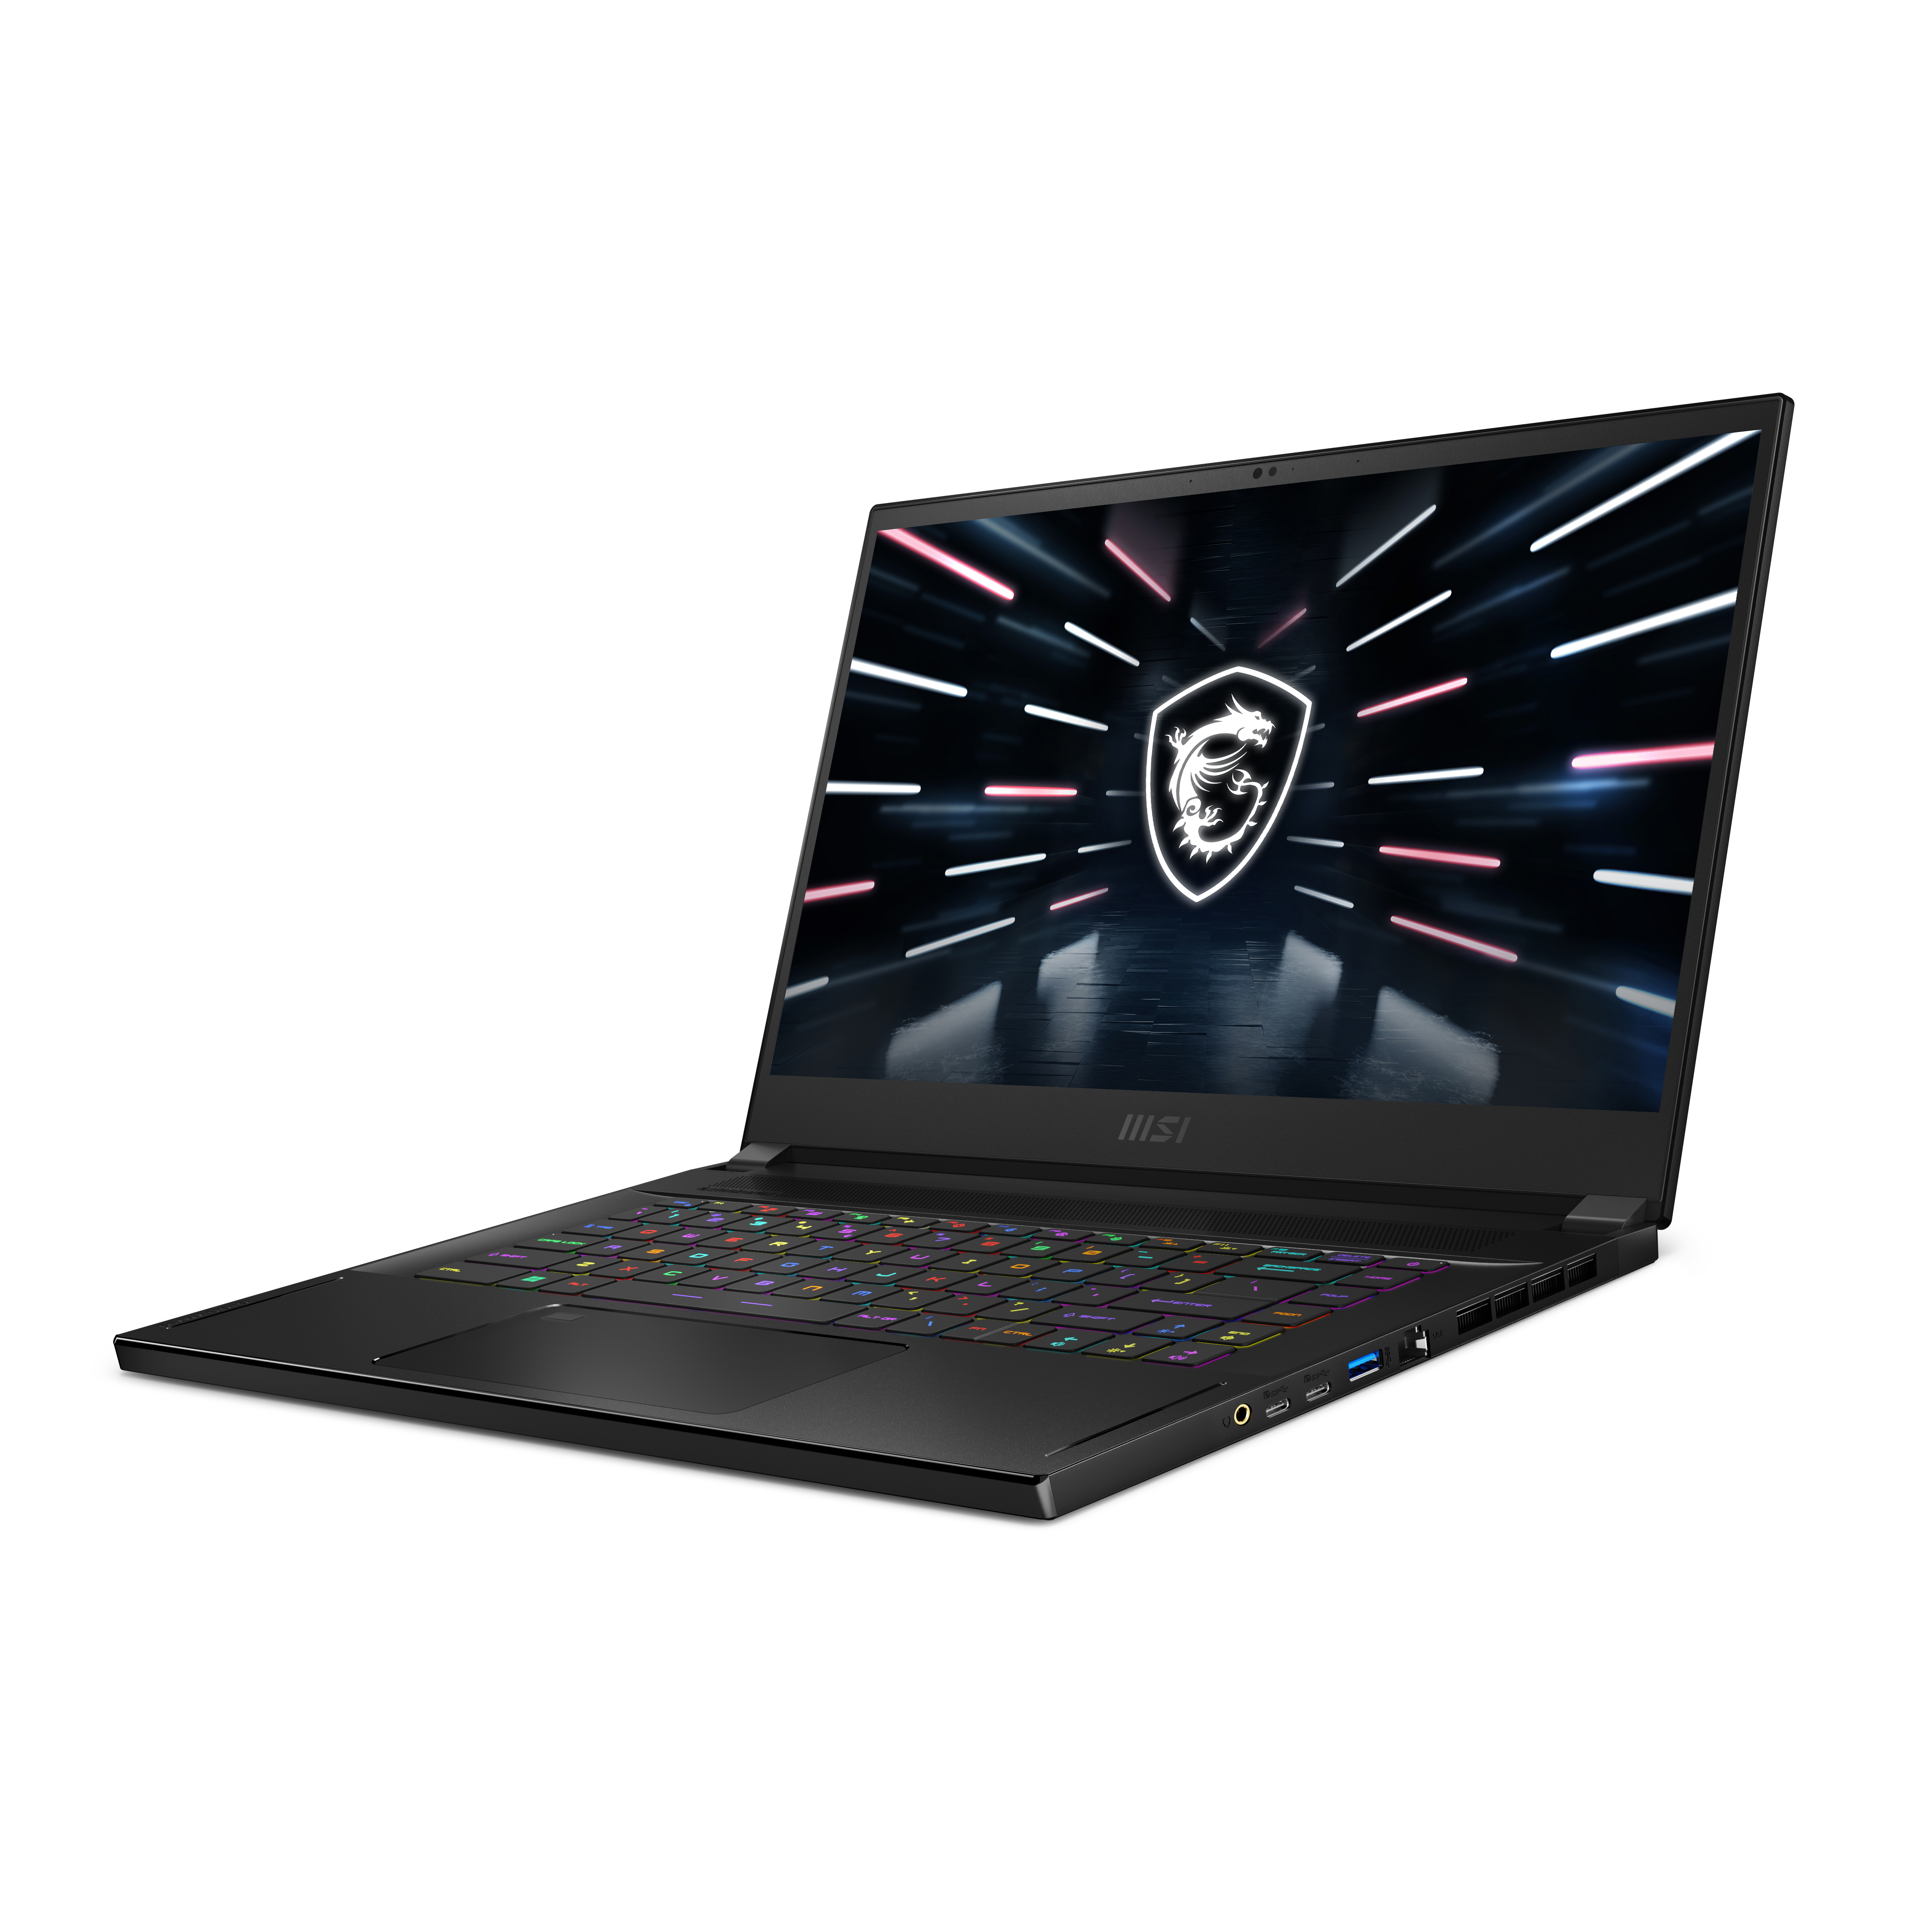 MSI Stealth GS66 Gaming Laptop, 15.6" QHD 240Hz, Intel Core i9-12900H, NVIDIA GeForce RTX 3070 Ti, 32GB RAM, 1TB SSD, Windows 11 Home, Stealth GS66 12UGS-039 - image 2 of 5